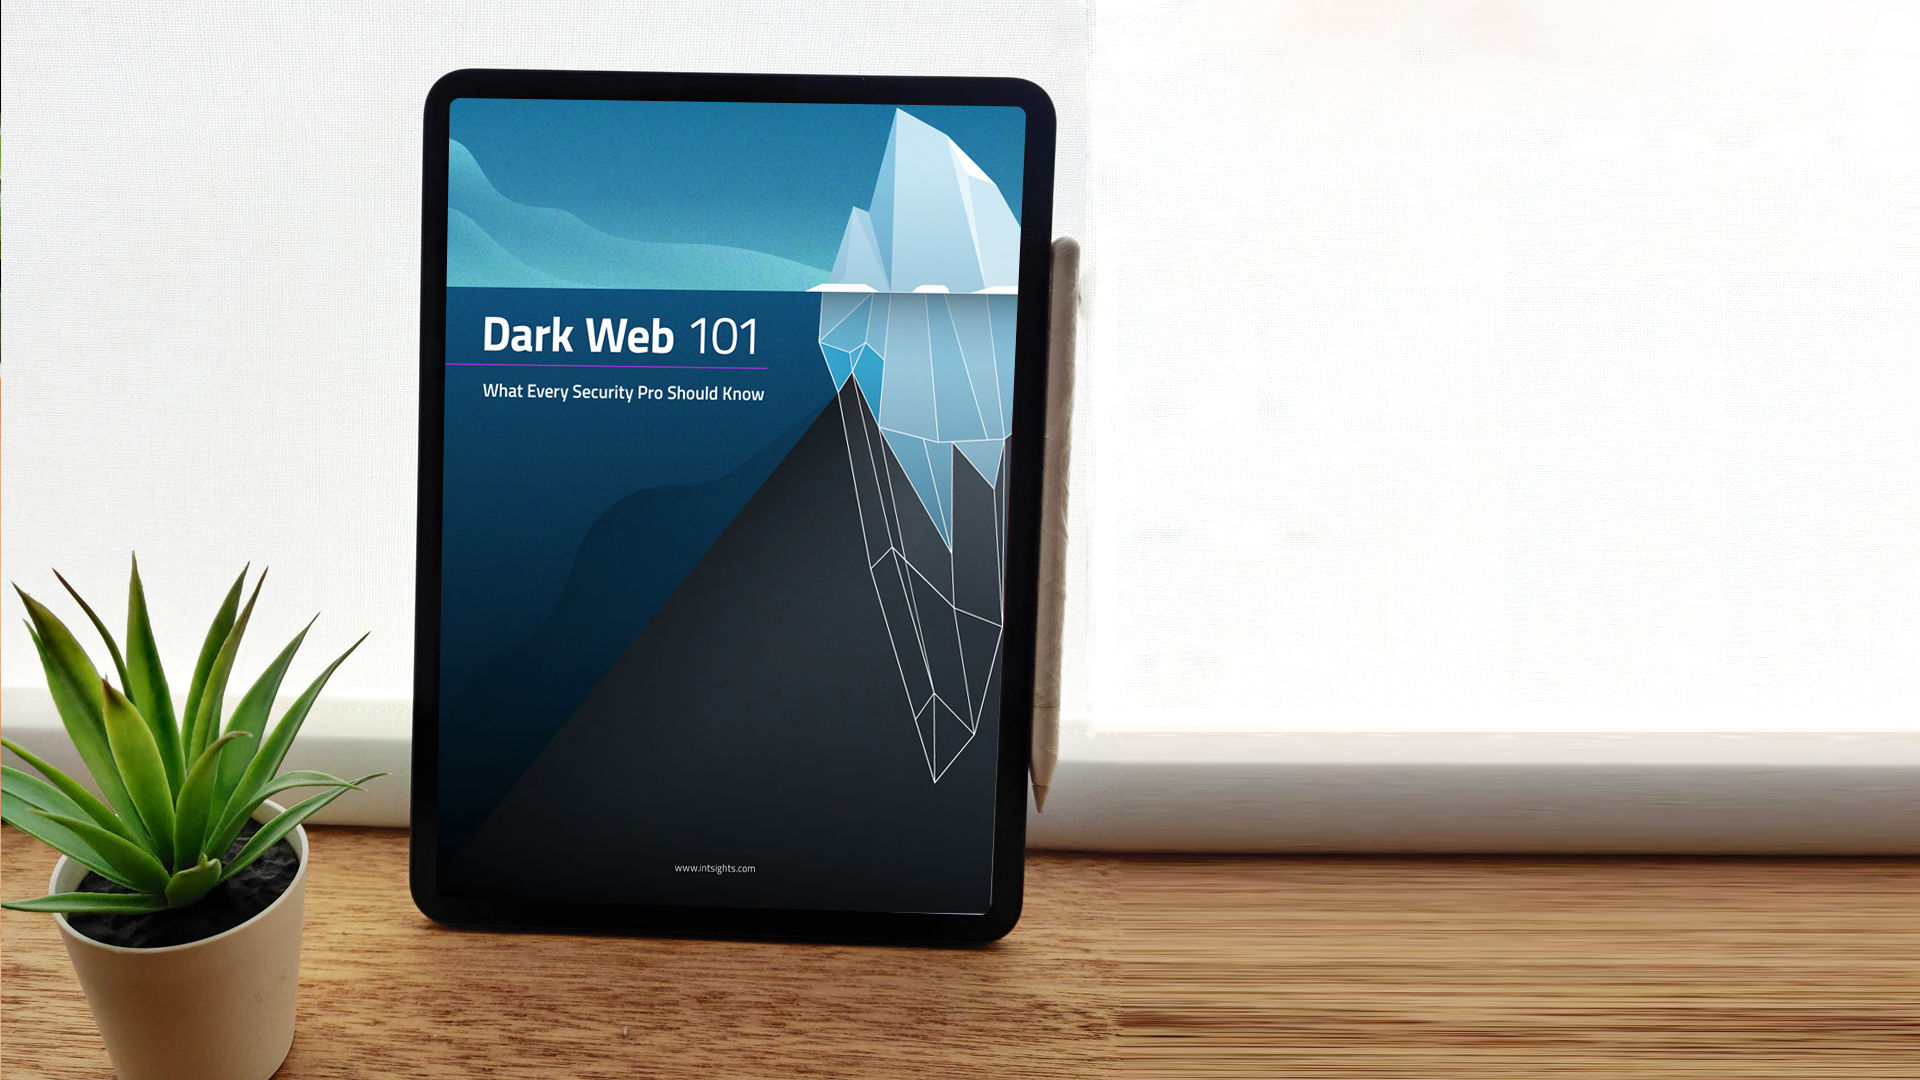 All you need to know about the Dark Web